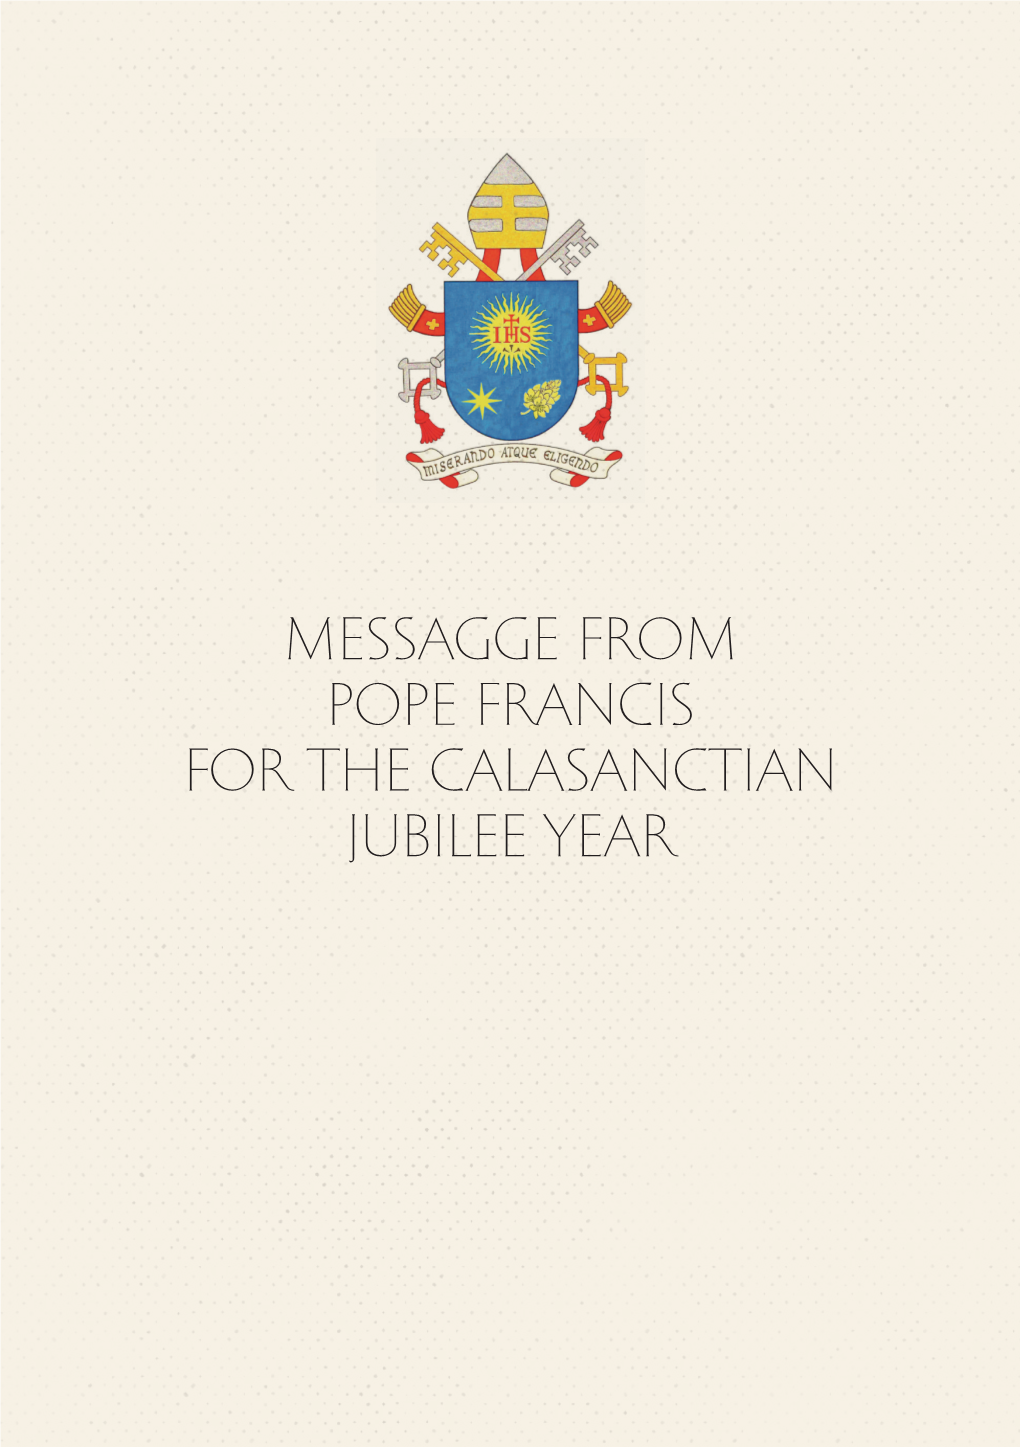 Message from Pope Francis for the Calasanctian Jubilee Year